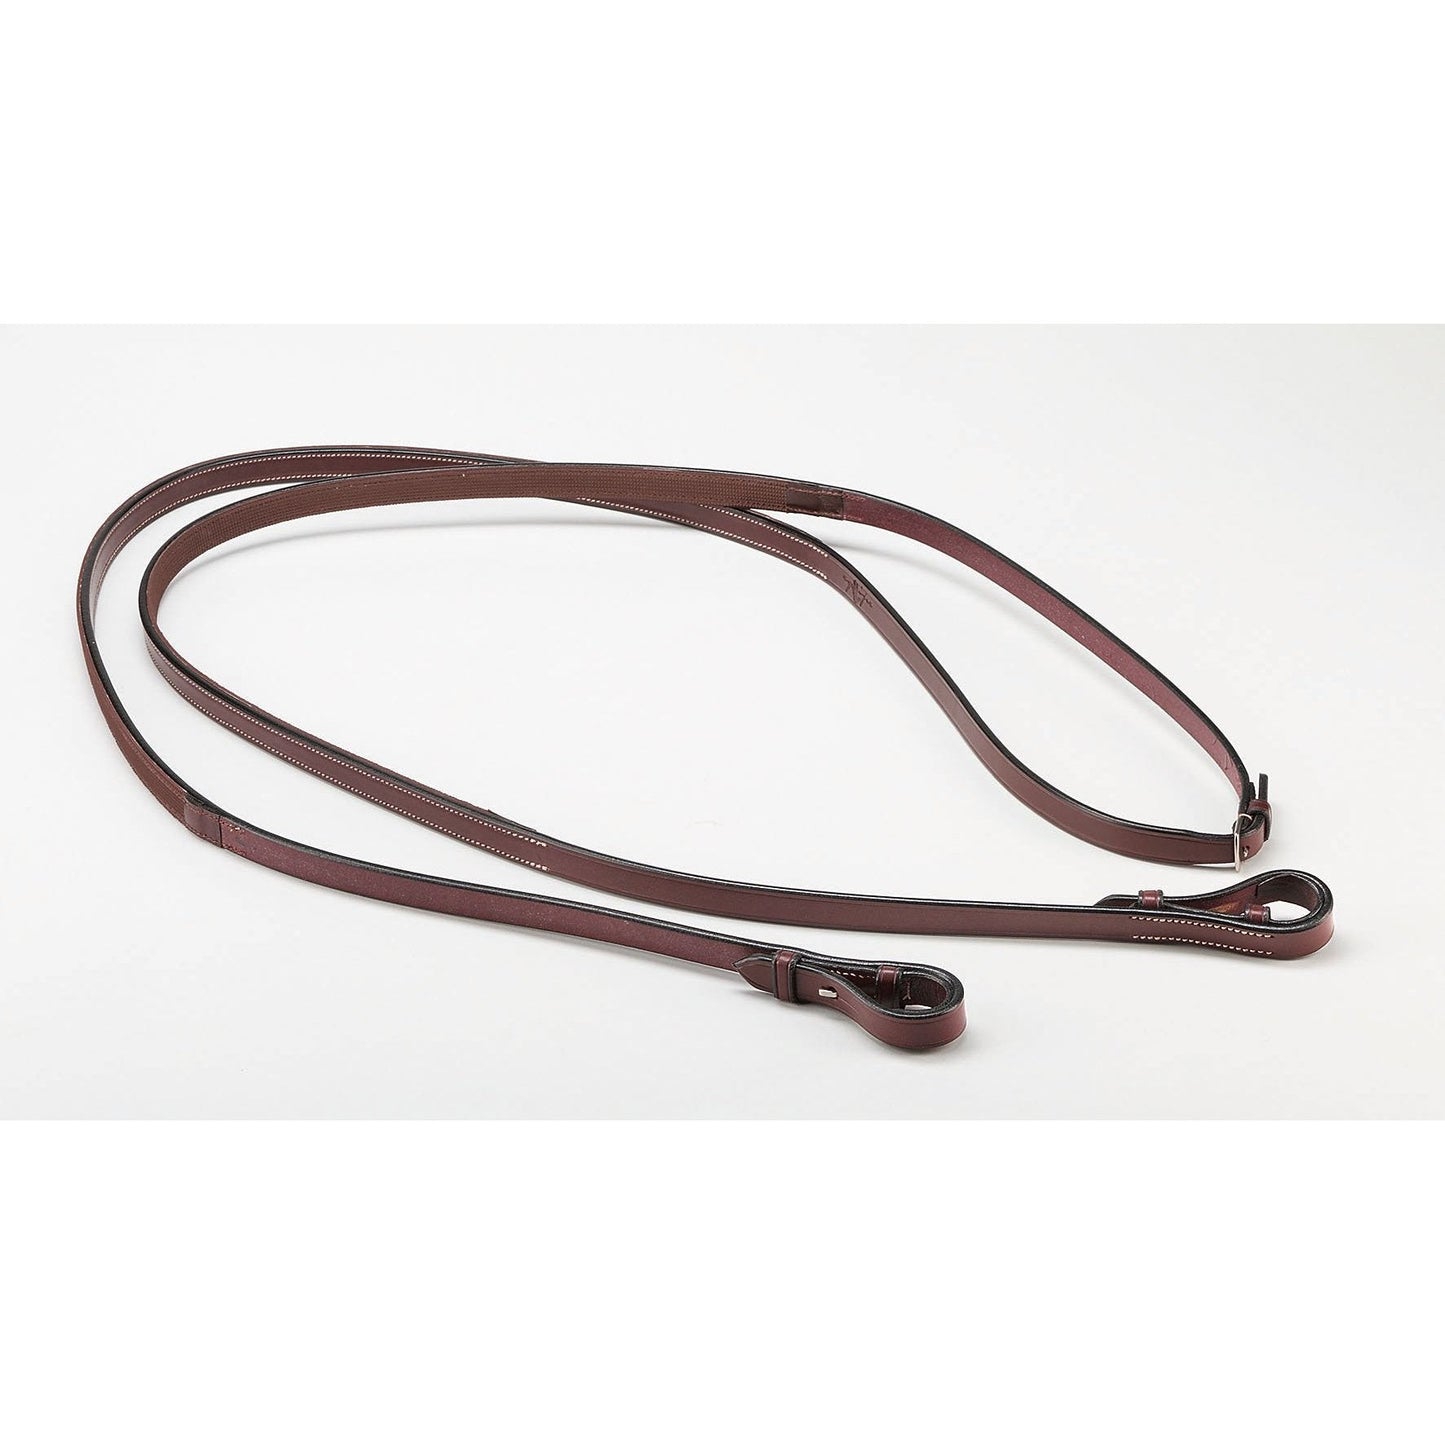 Brown leather horse riding reins on a plain background.